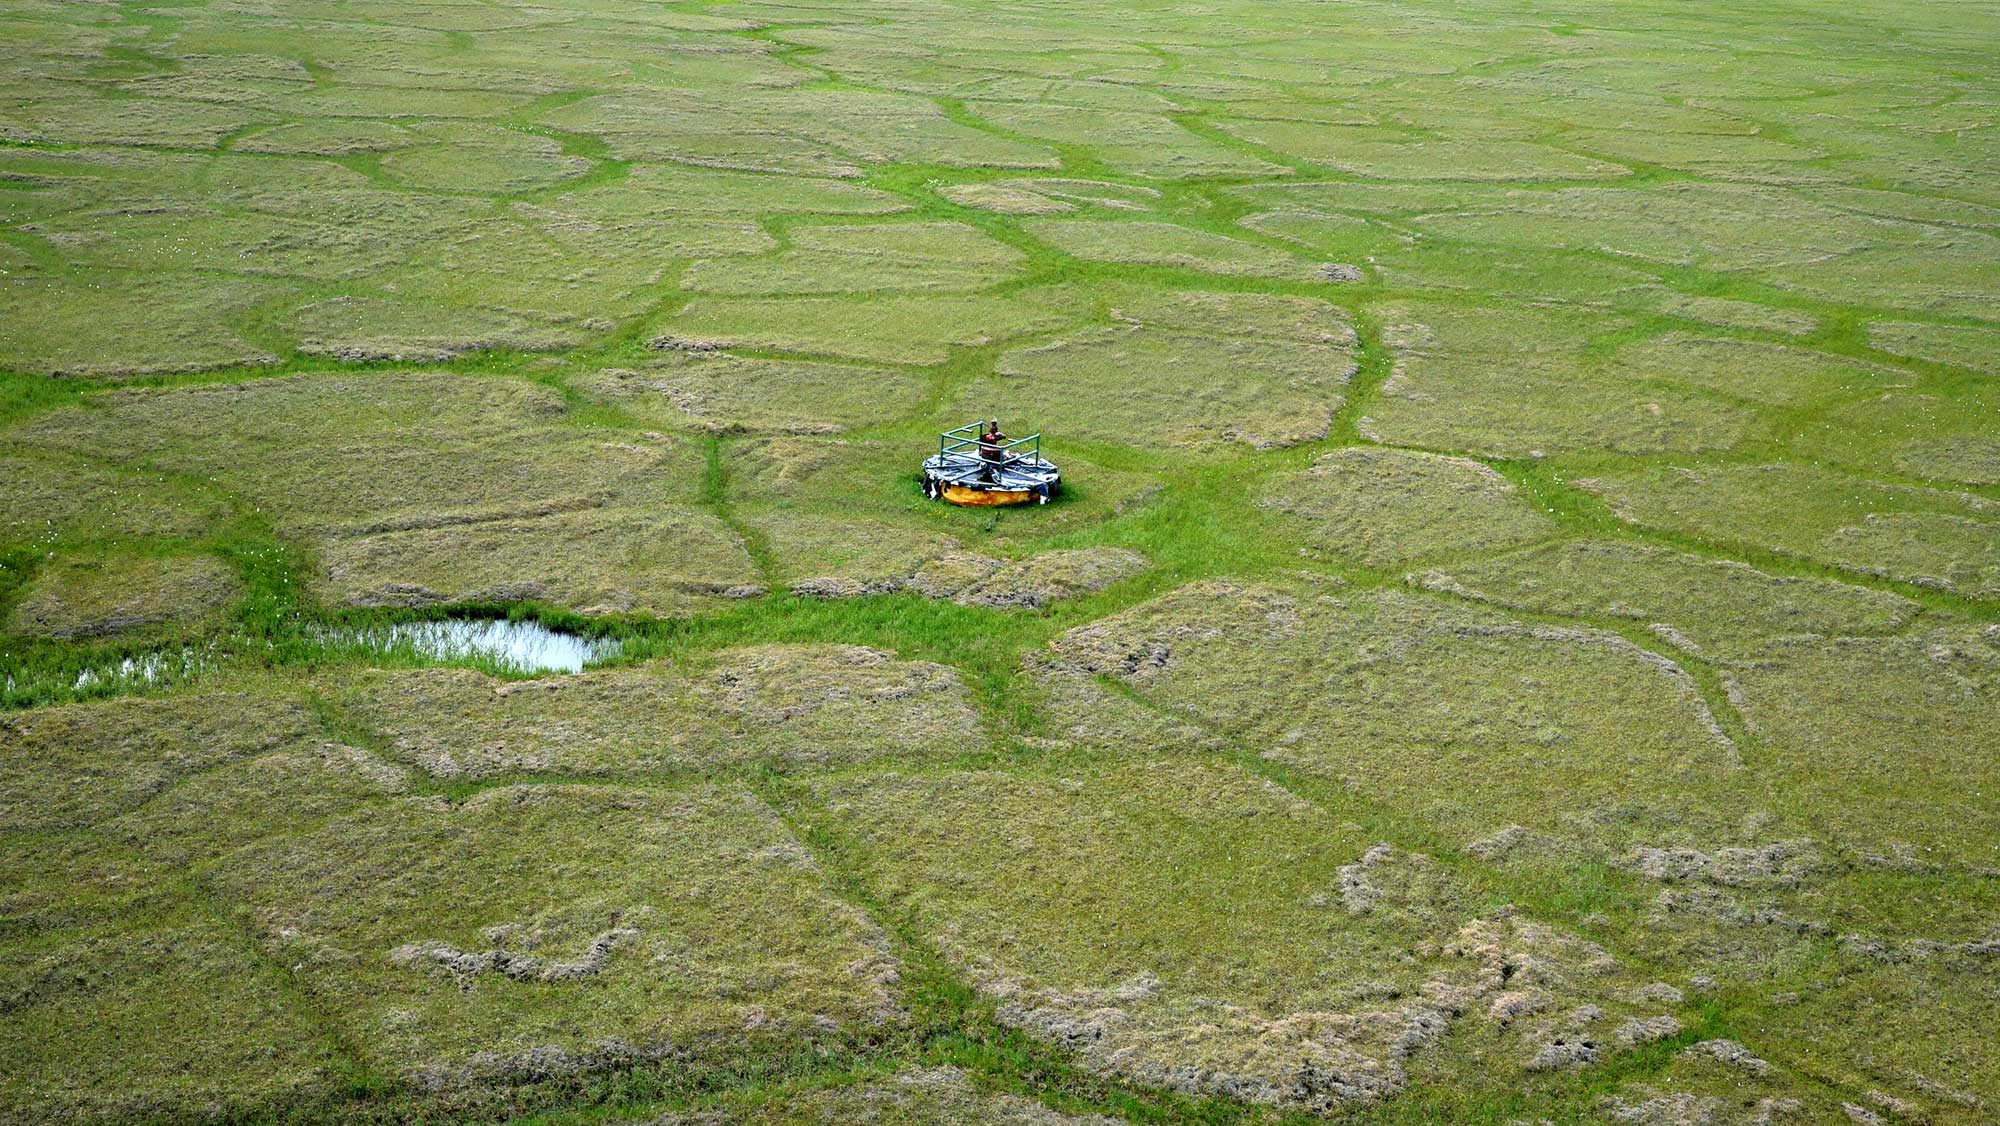 Photograph of an oil well head (essentially, a cap) in the permafrost near the Arctic National Wildlife Refuge. The cap is a small black and orange circular structure. The surrounding ground is green with a clear polygonal pattern, which is made by the ice wedges of the permafrost.